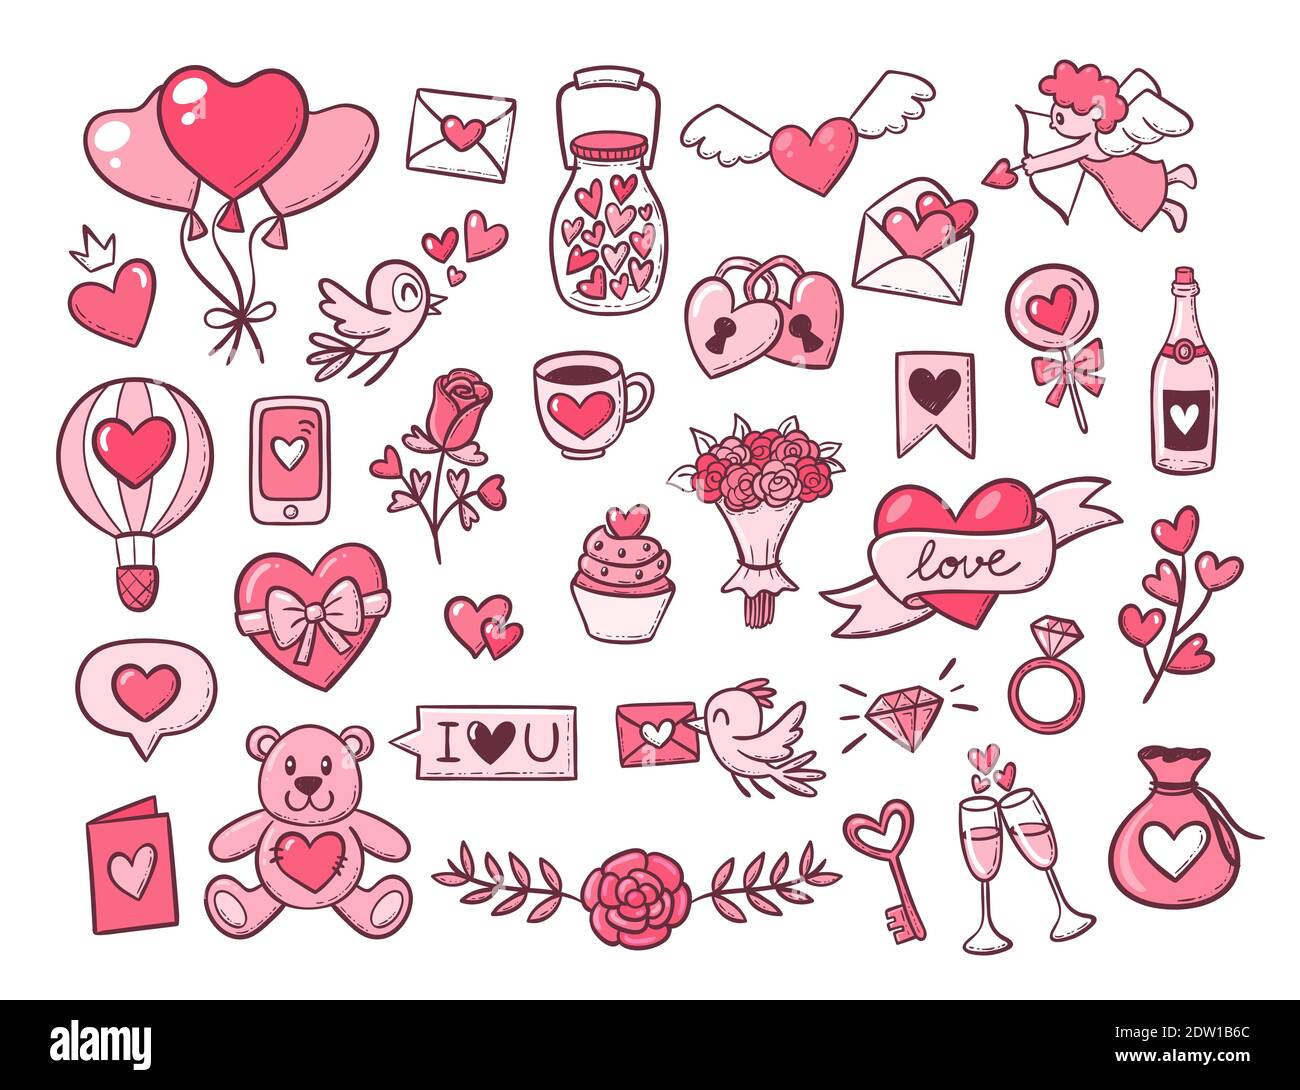 Hand drawn Valentine's Day objects. Cute and pink elements isolated on white. EPS 10 vector illustration. Stock Vector